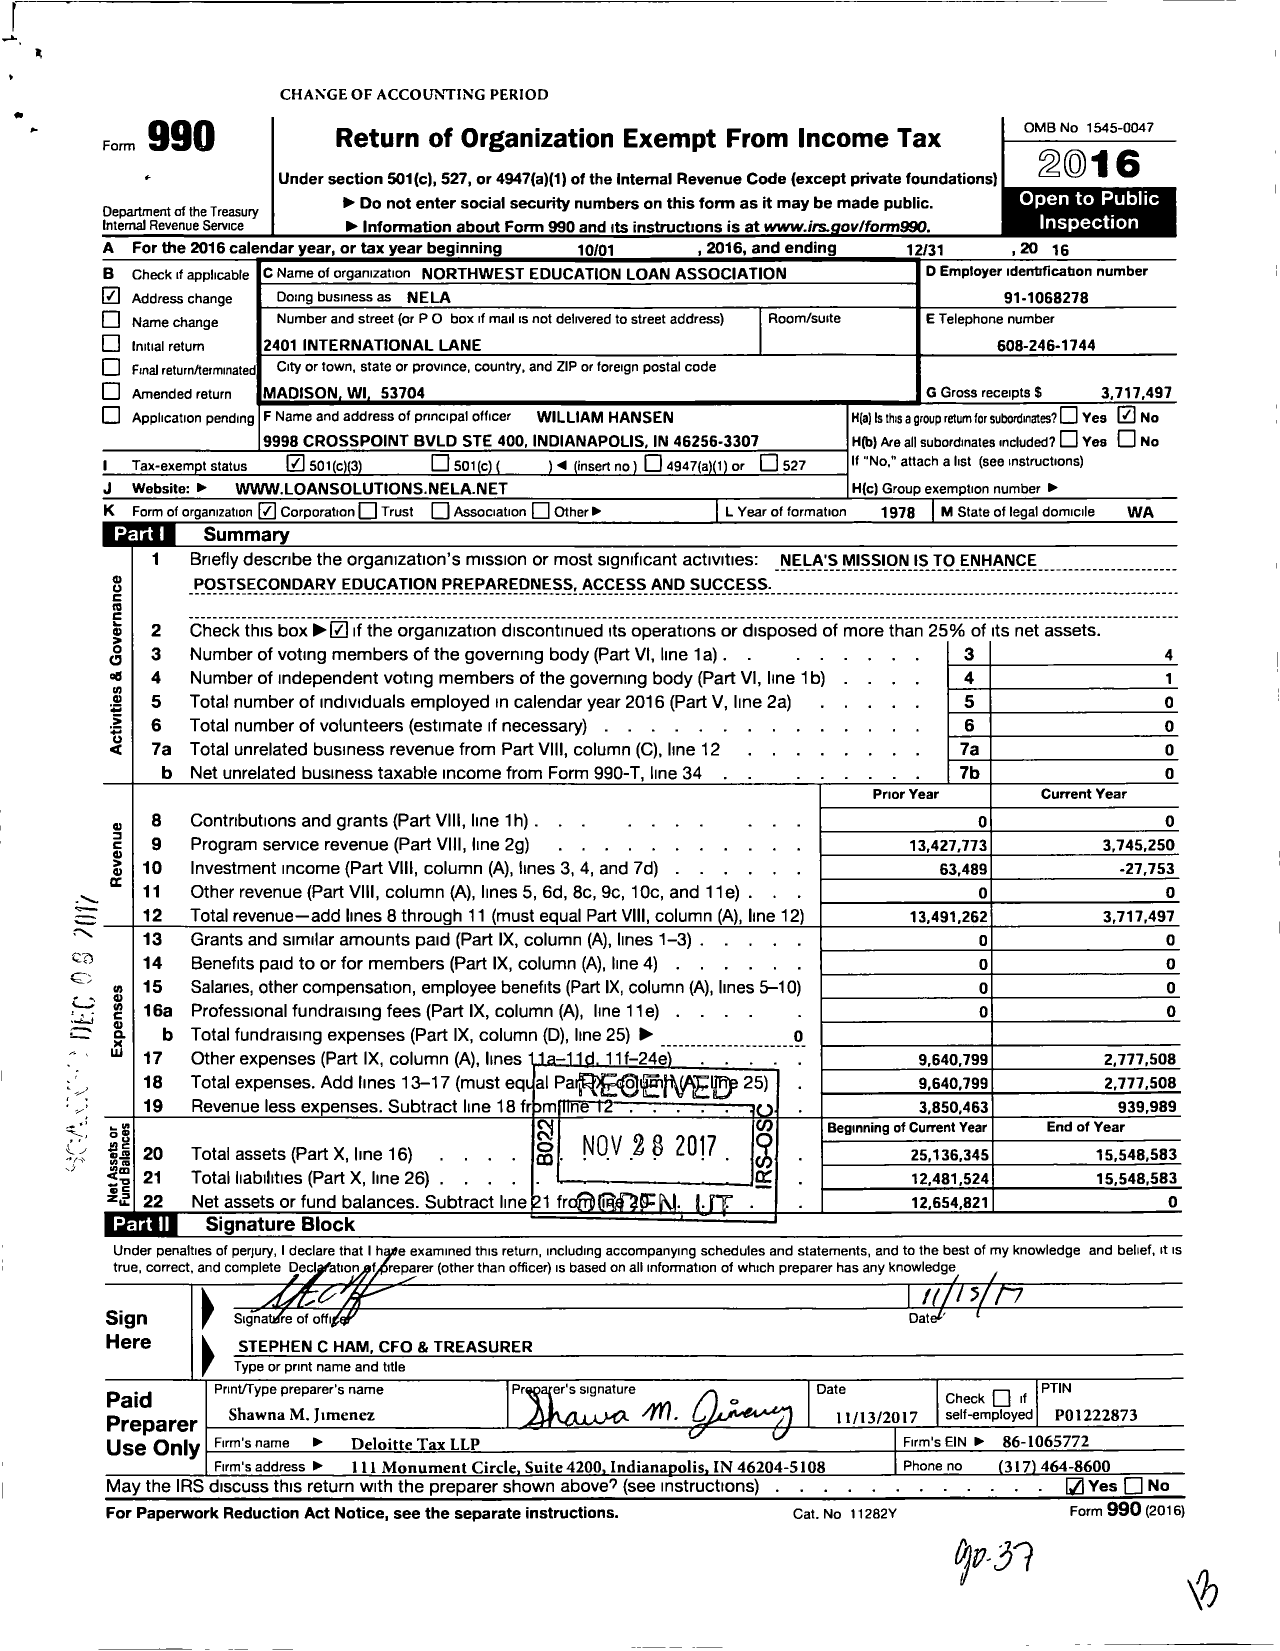 Image of first page of 2016 Form 990 for Northwest Education Loan Association (NELA)